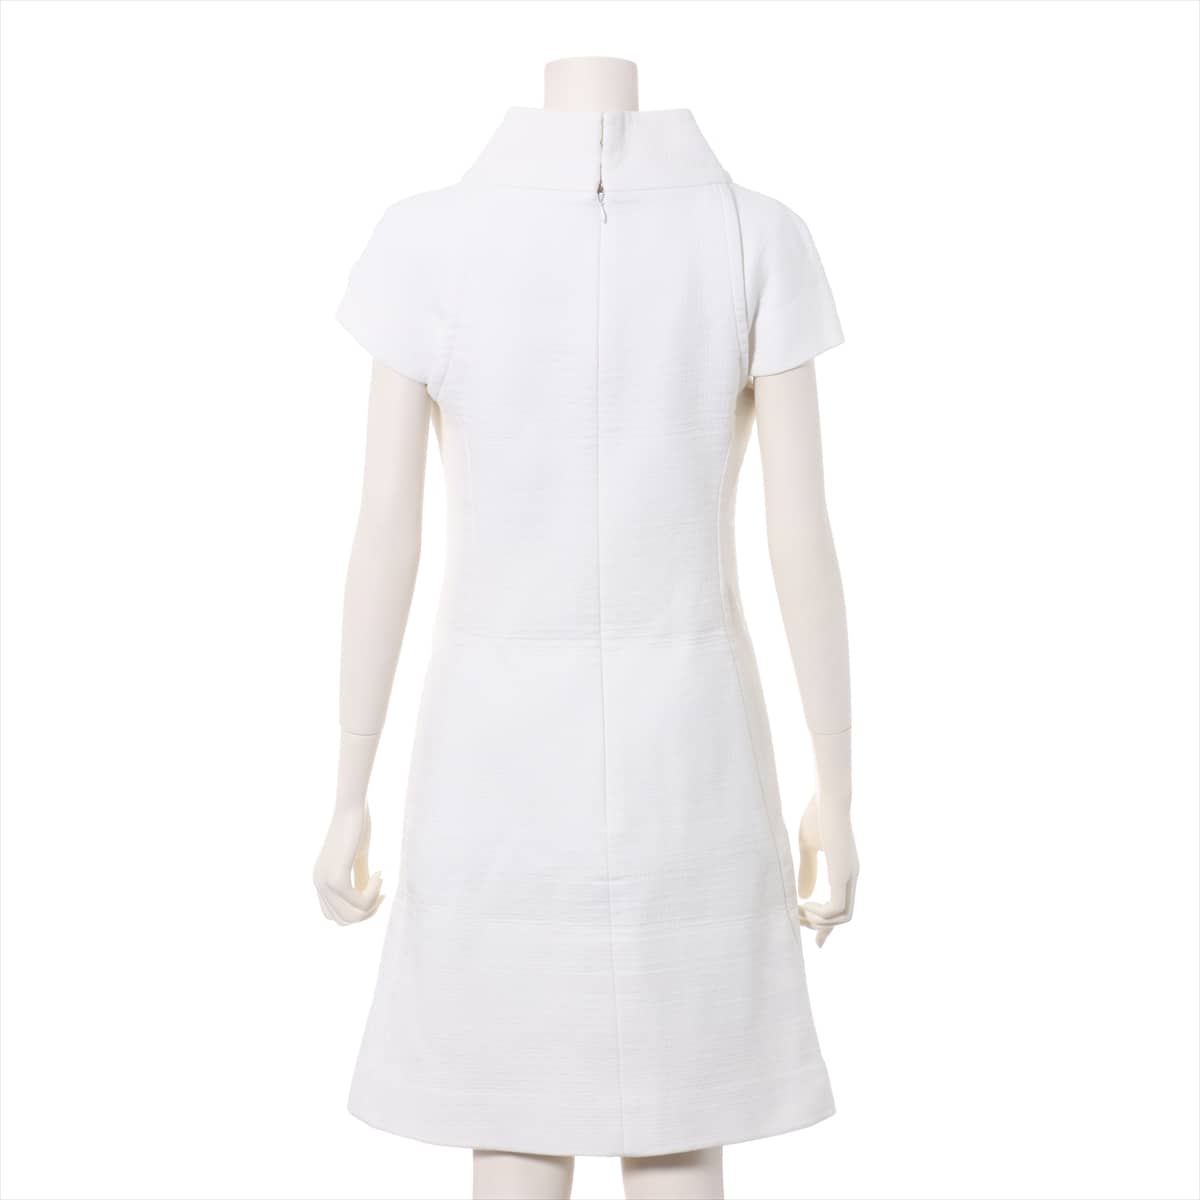 Chanel Coco Mark P57 Cotton & nylon Dress 36 Ladies' White  There are spots on the armpits